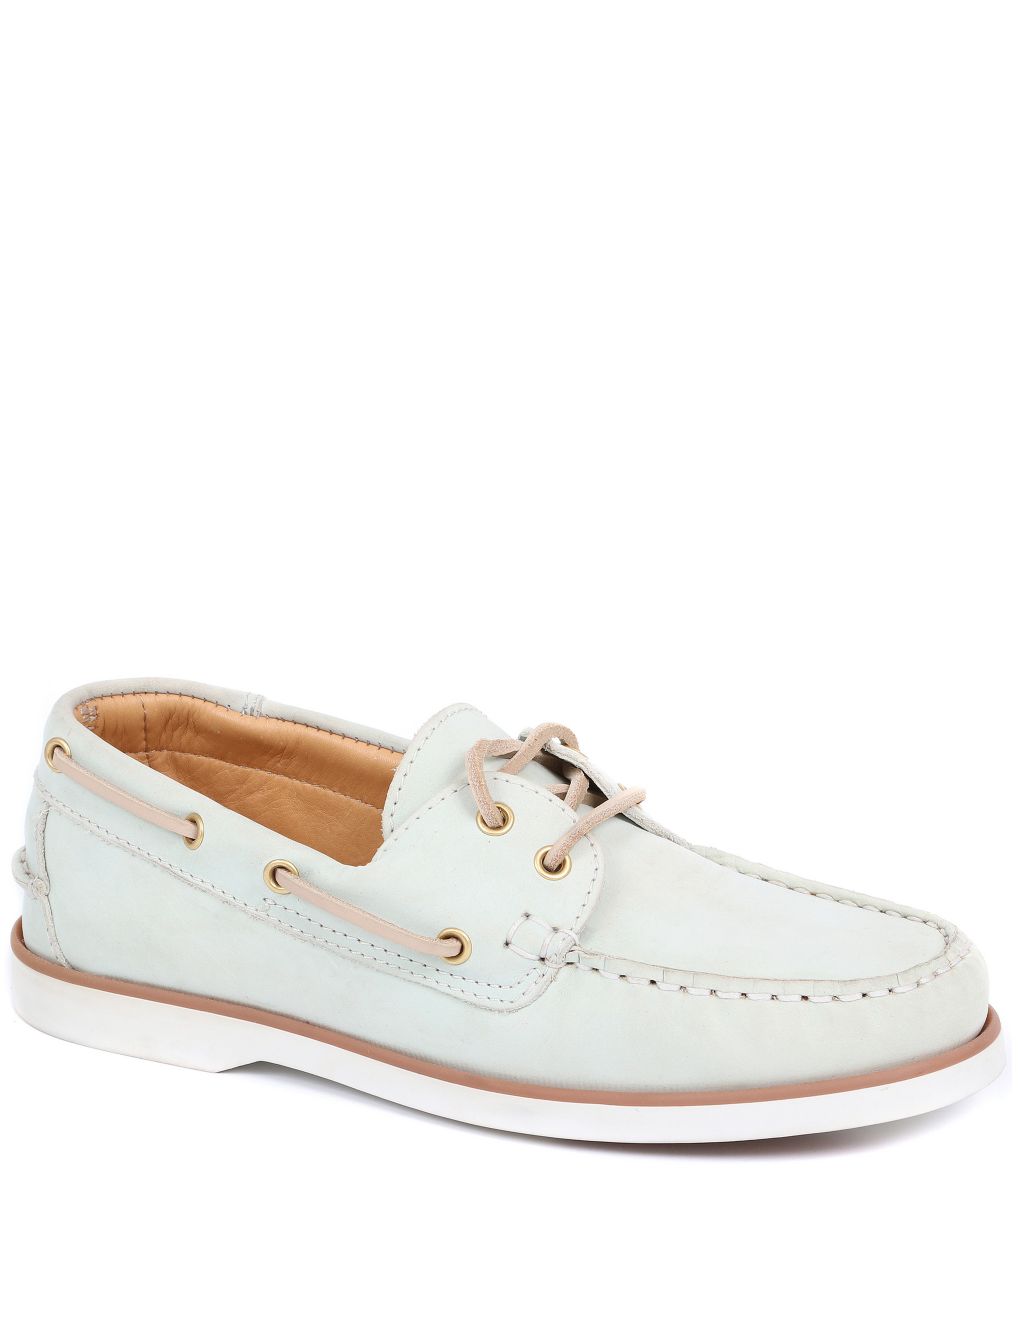 Leather Lace Up Slip On Boat Shoes image 2